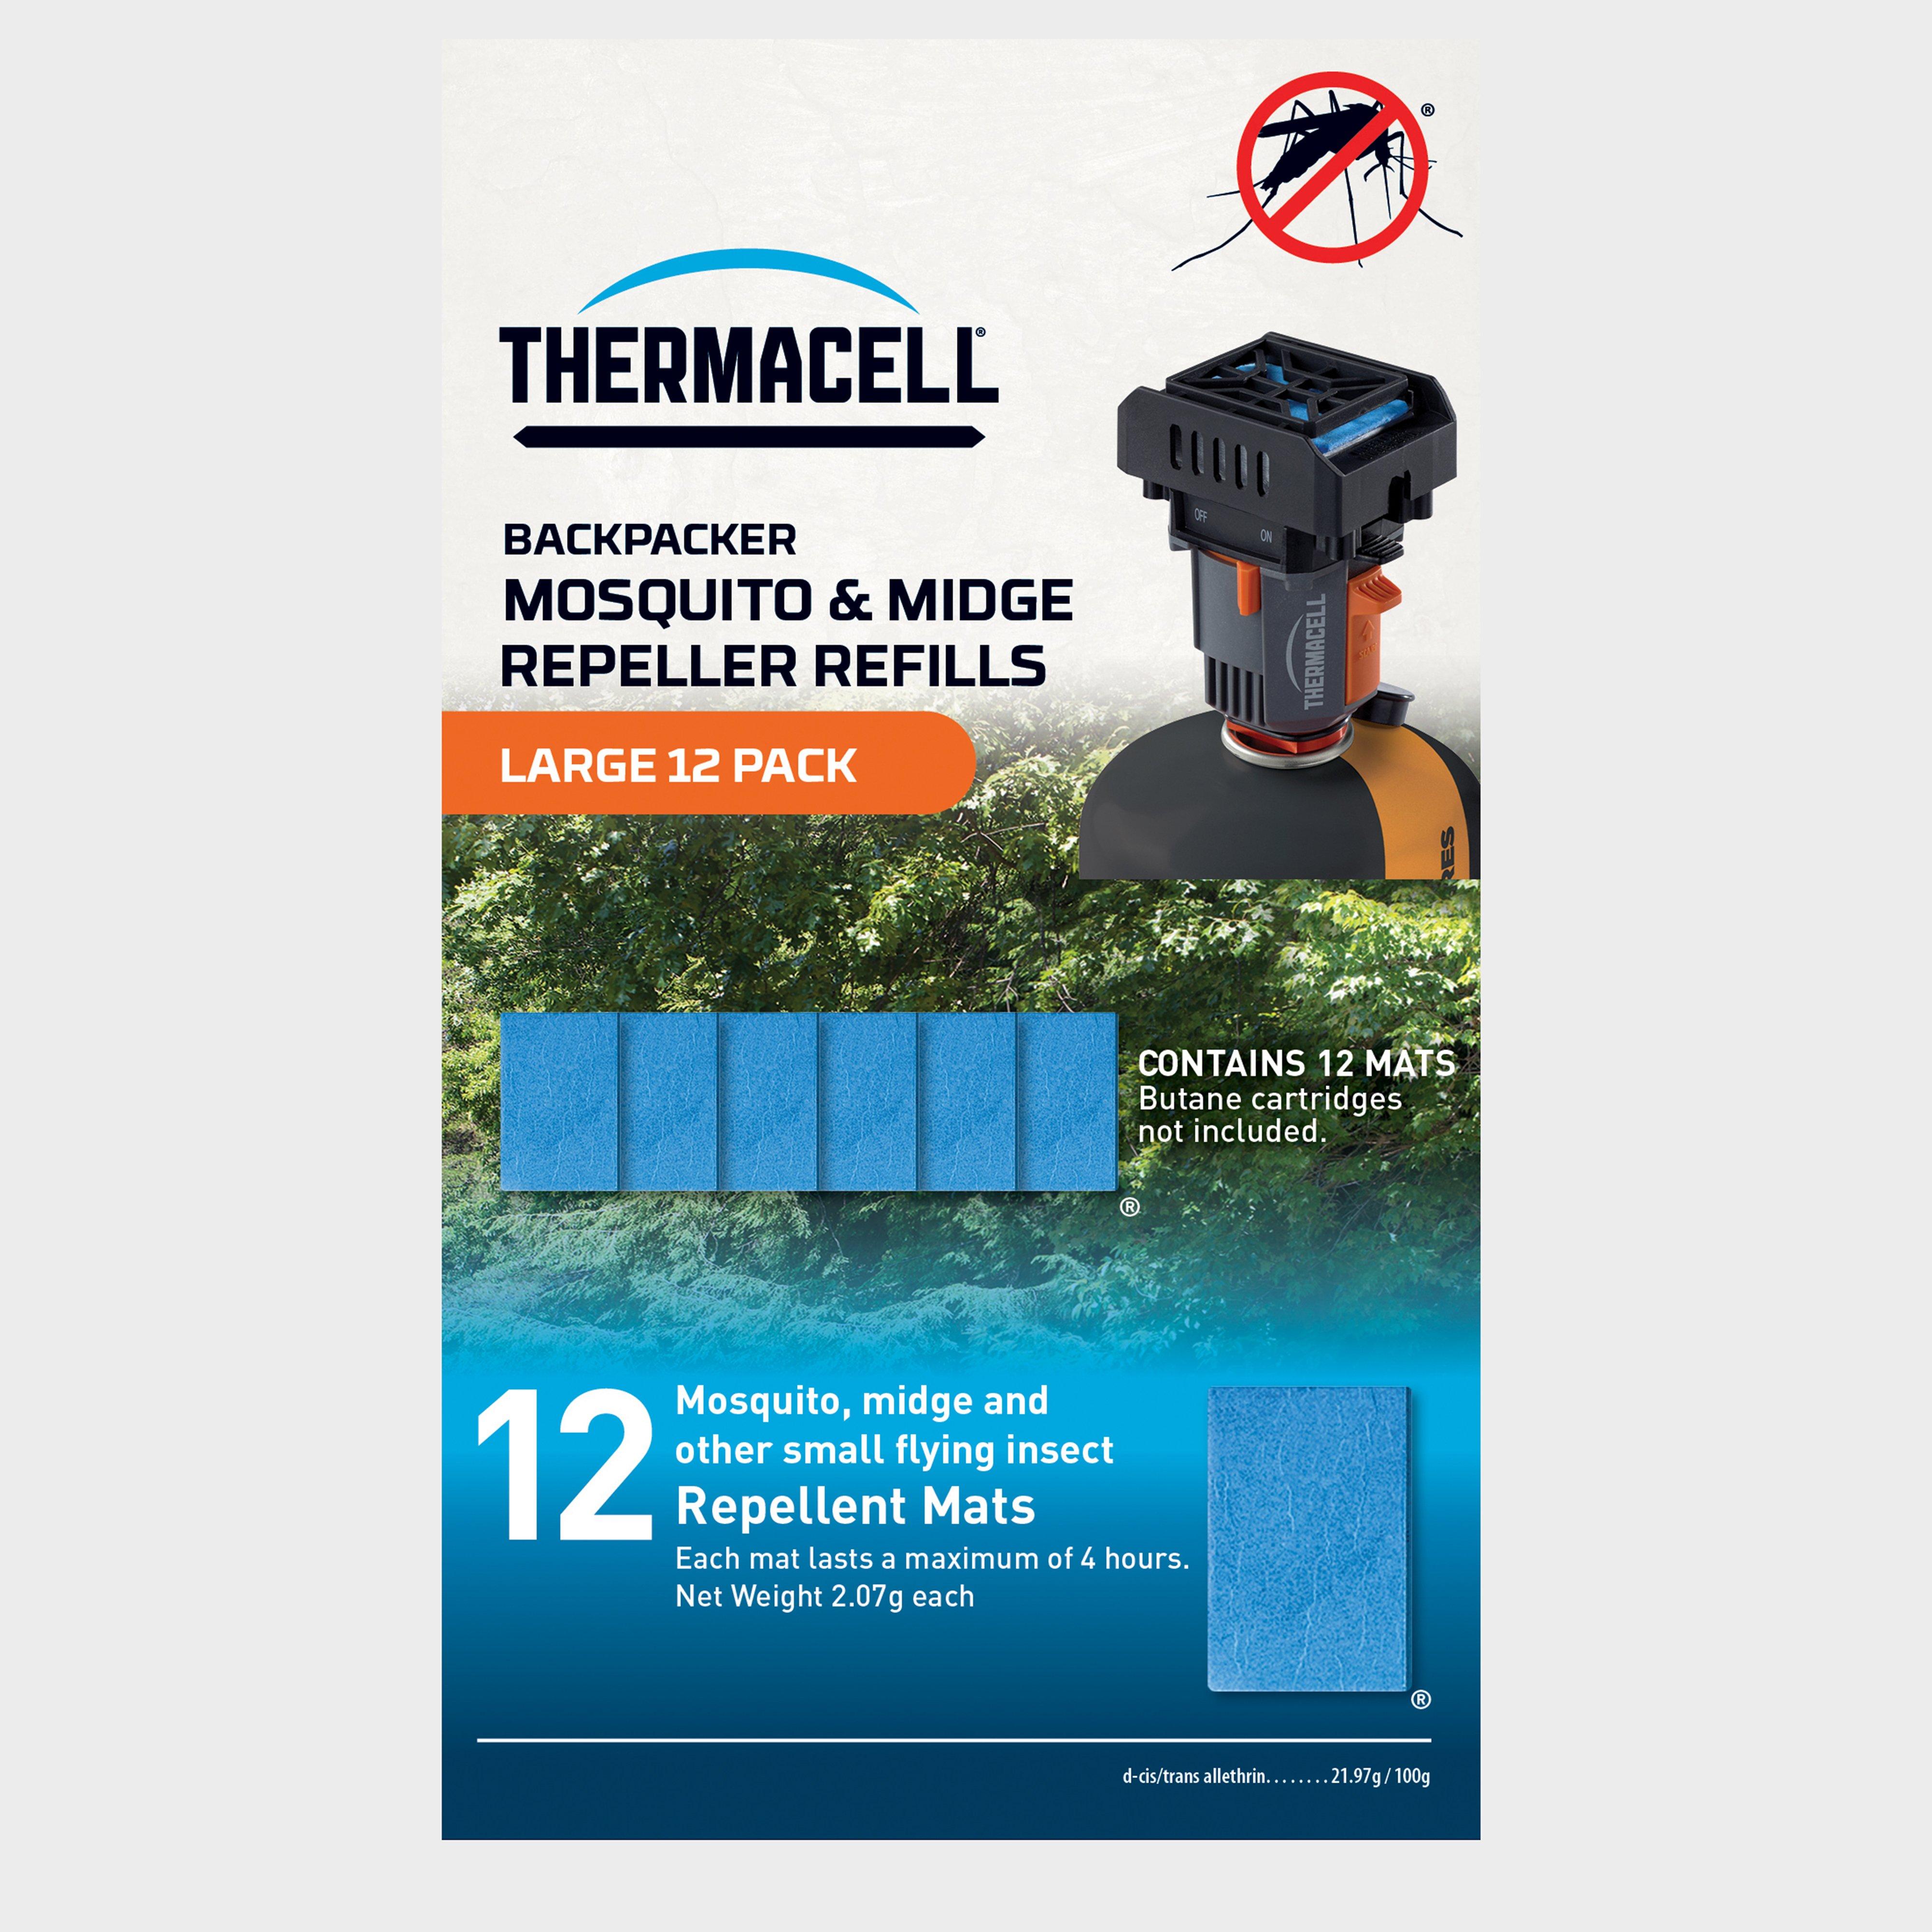 Thermacell Large Backpacker MosquitoandMidge Repeller Refills (12 Pack) - Multi/mats  Multi/mats